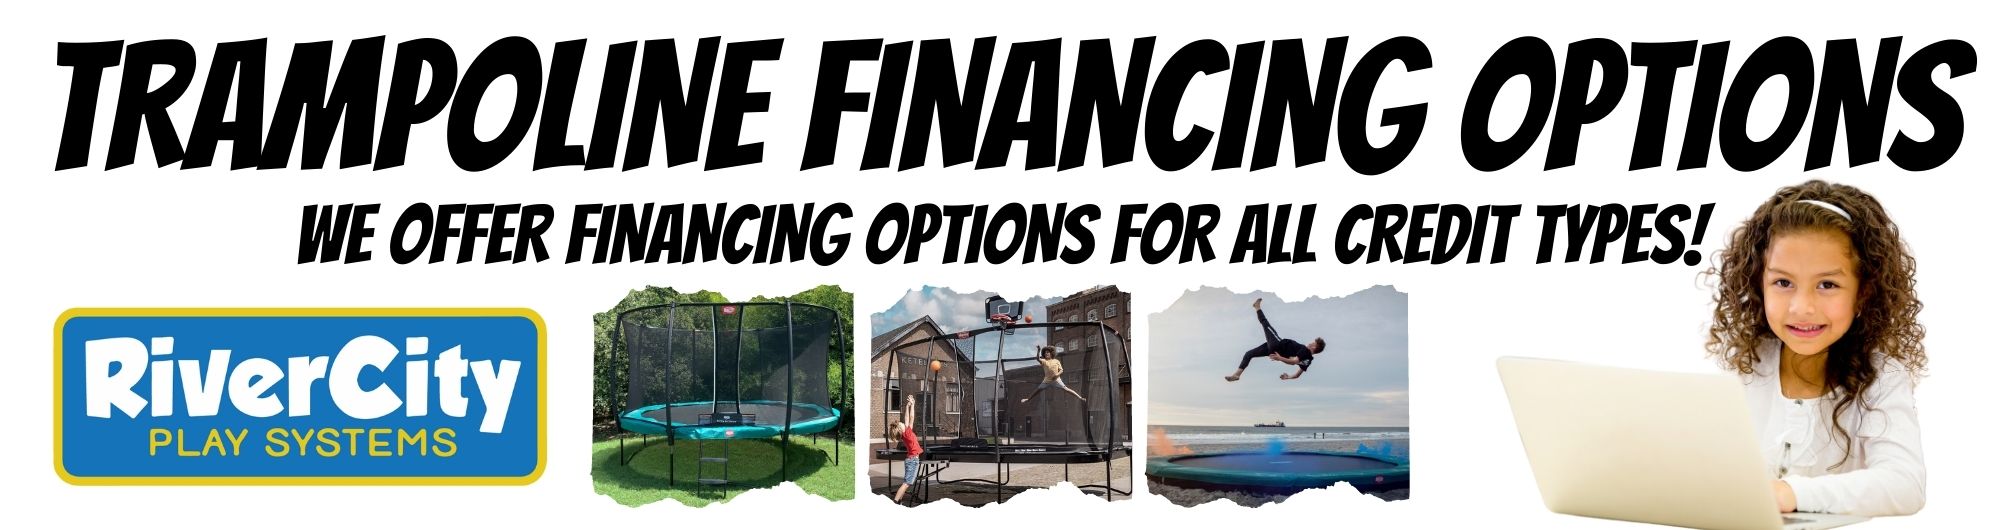 Trampoline financing available at River City Play Systems. Finance your trampoline purchase.